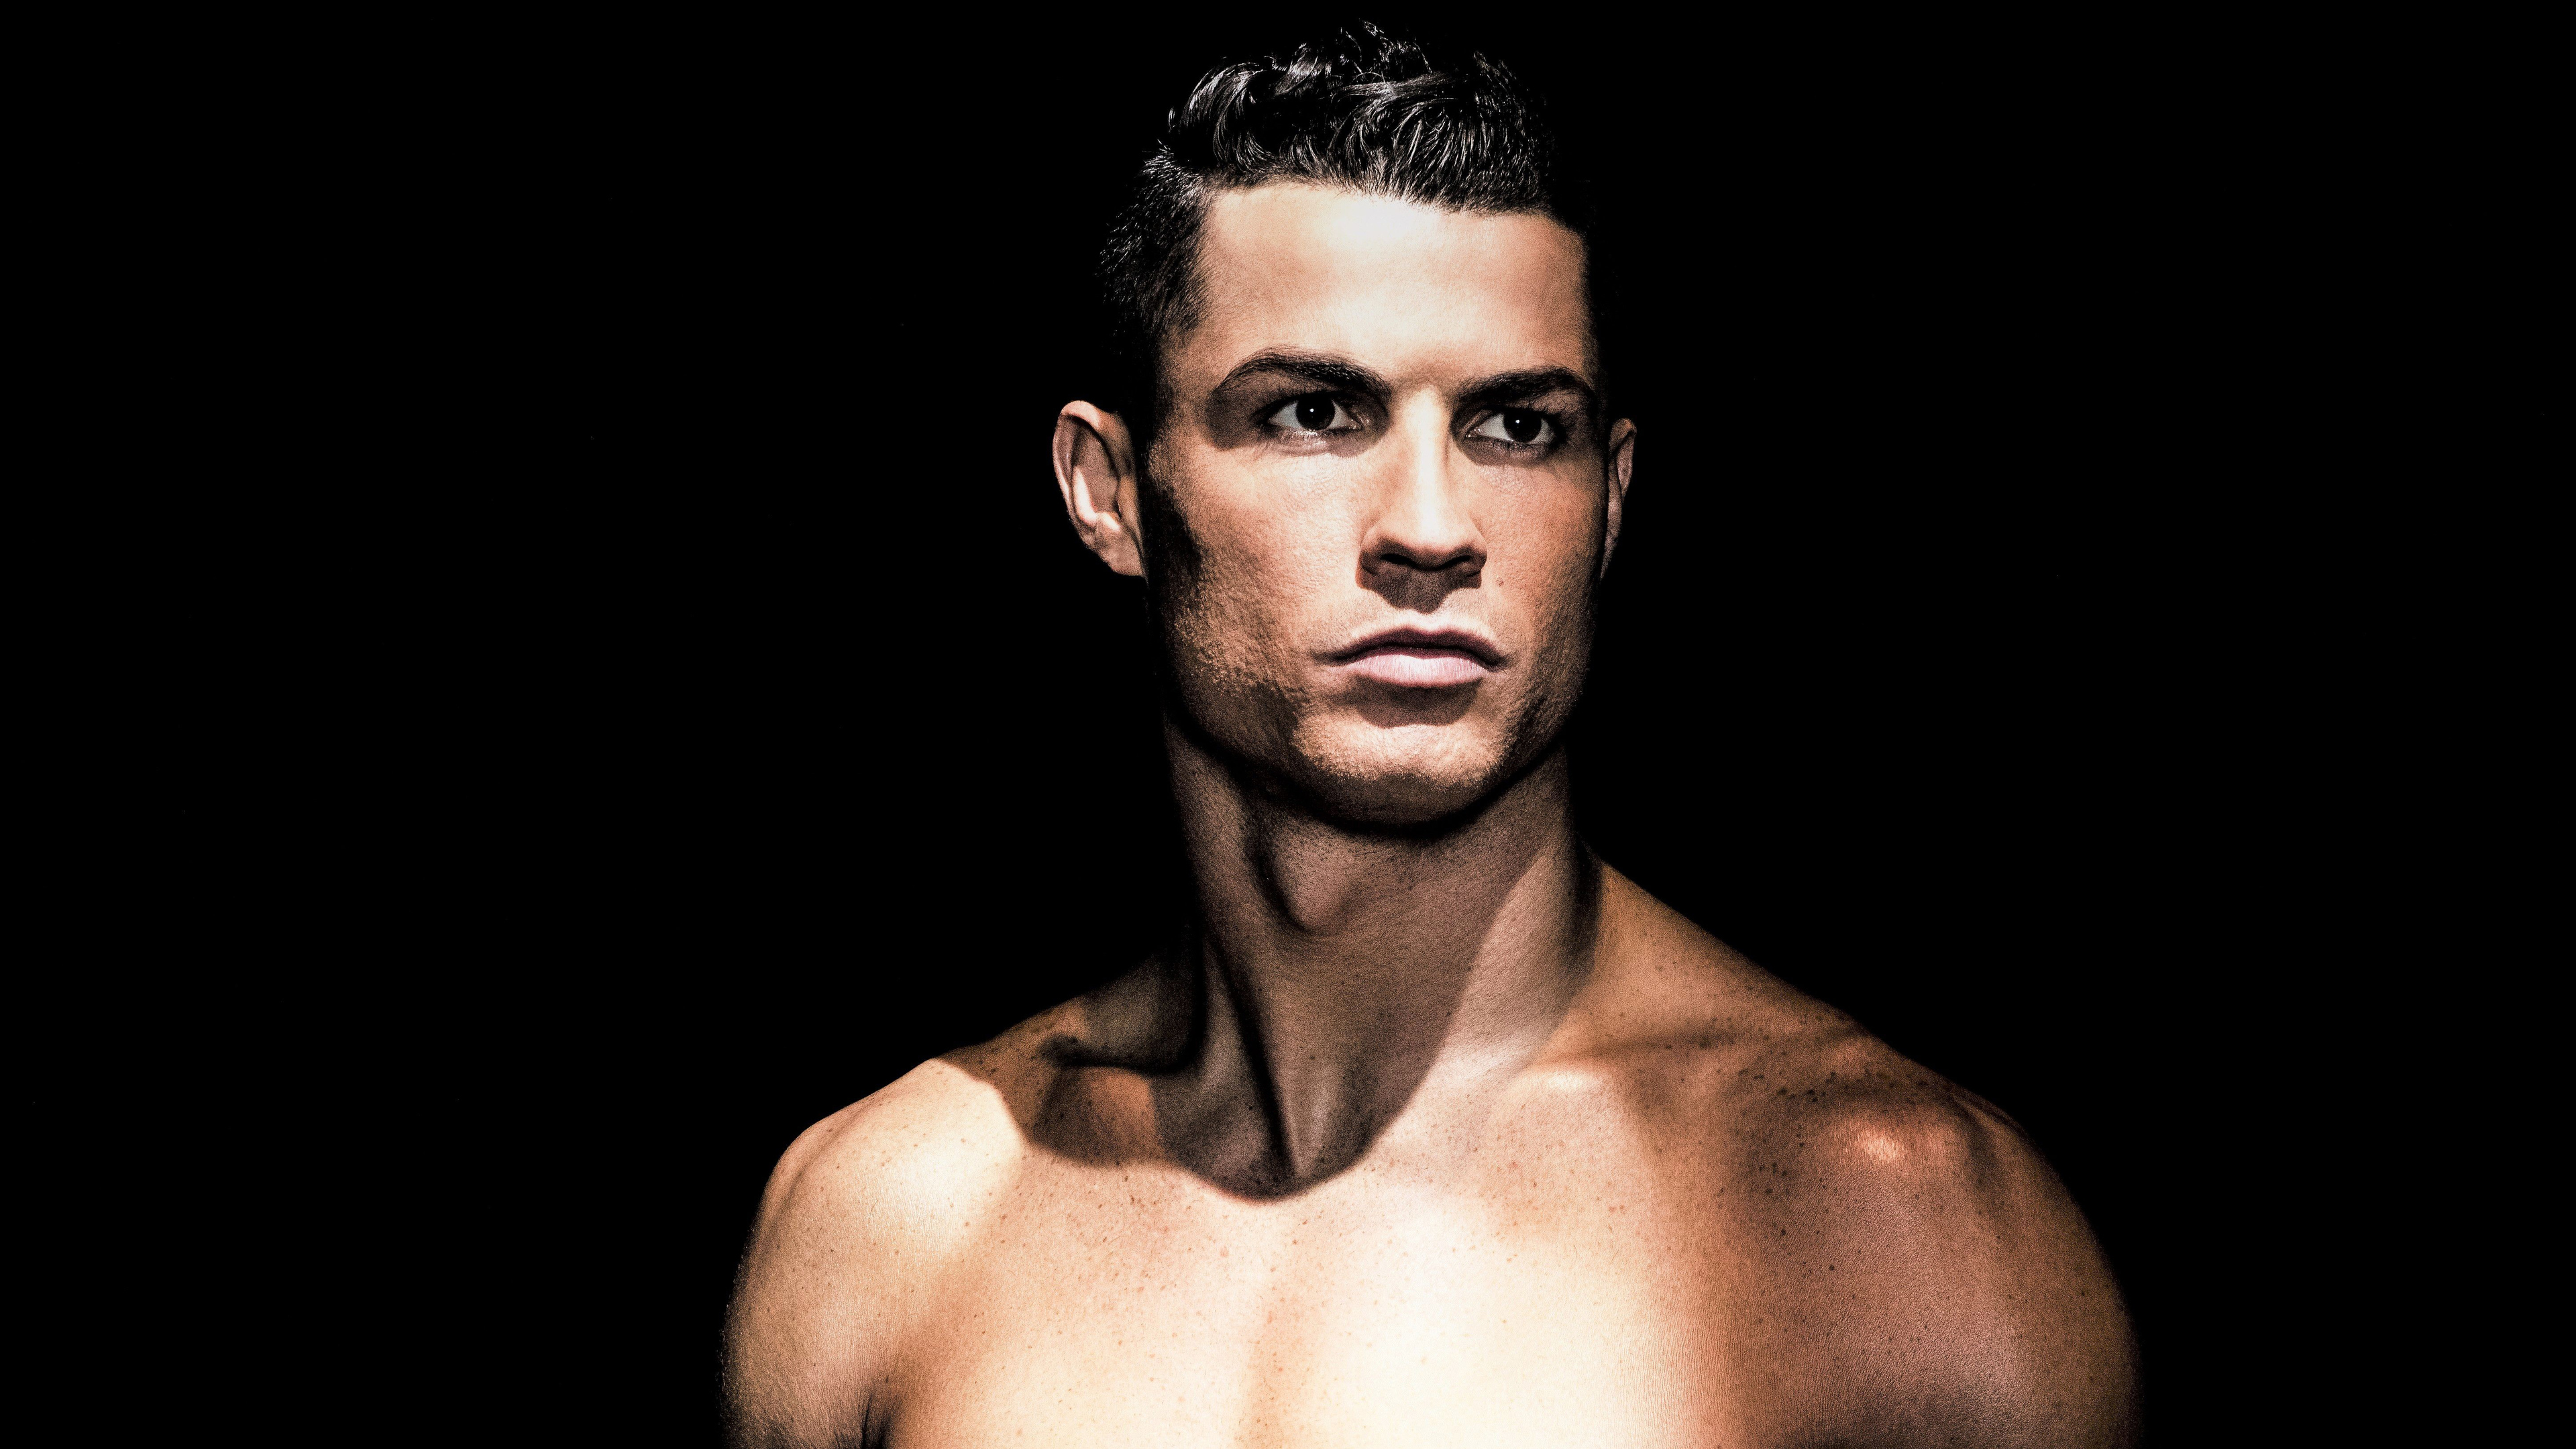 Cristiano Ronaldo 4k New sports wallpapers, male celebrities wallpapers